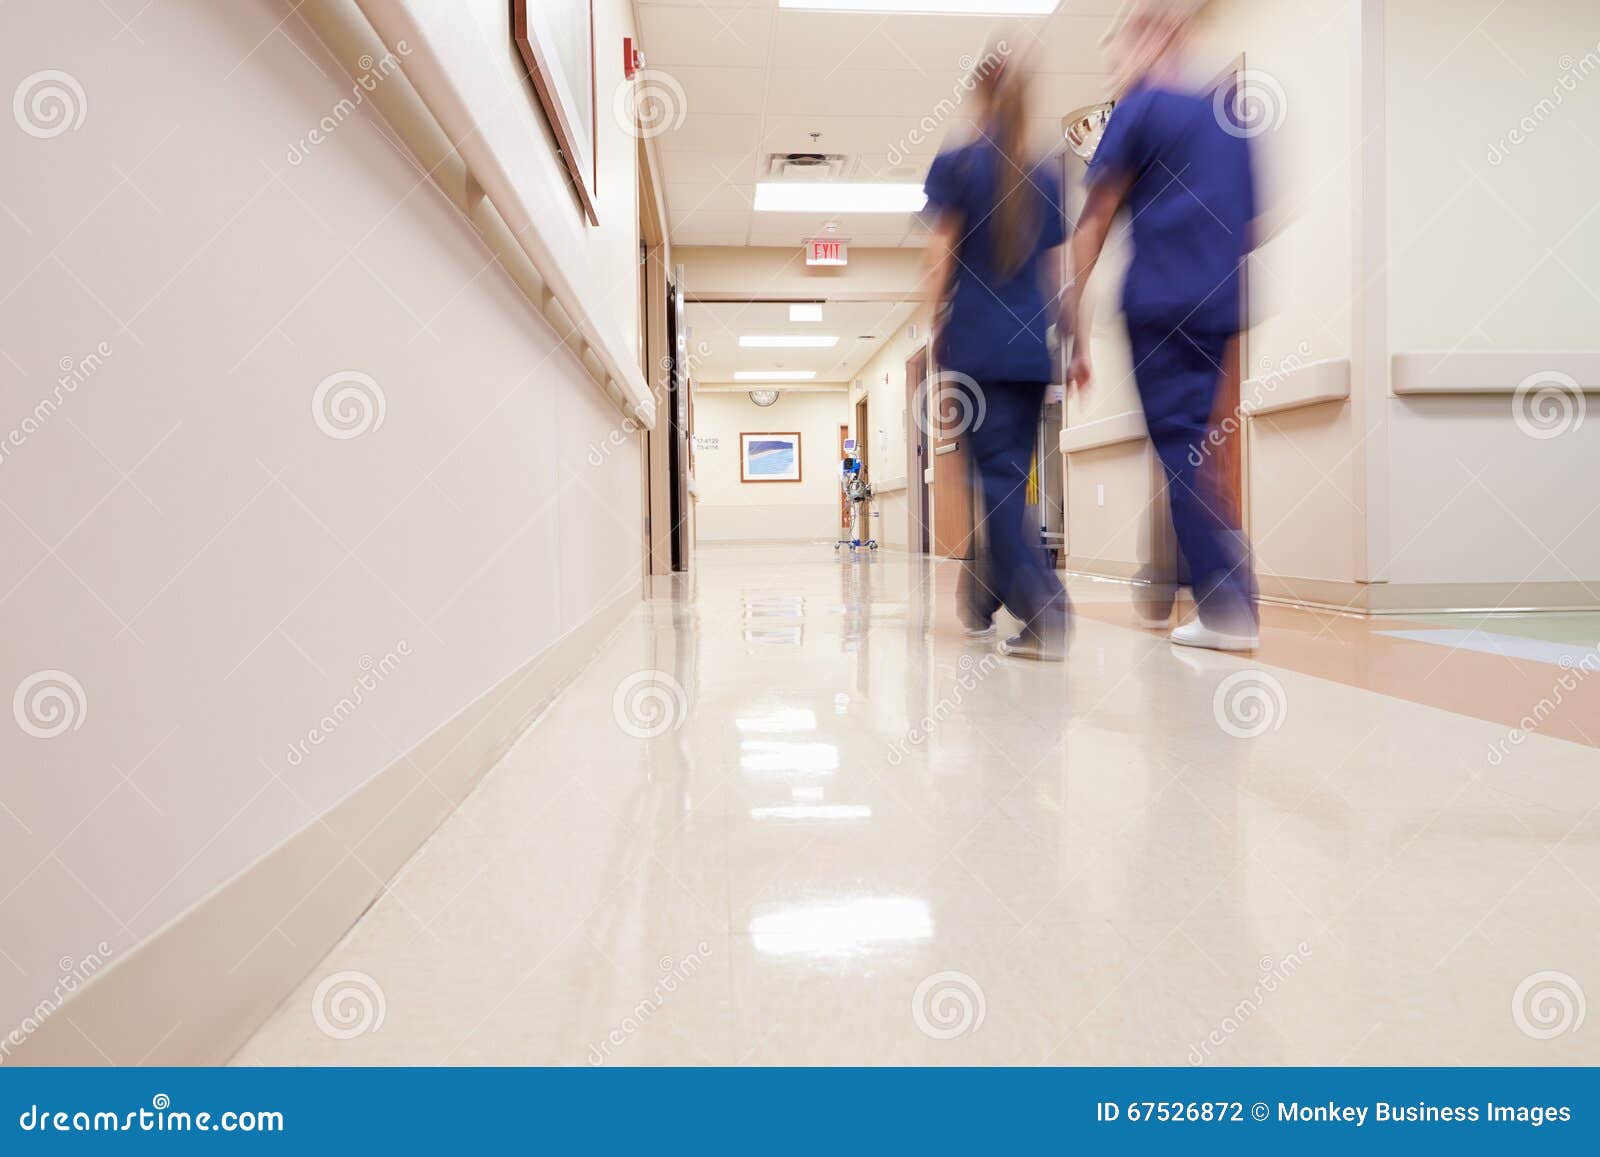 busy hospital corridor with medical staff